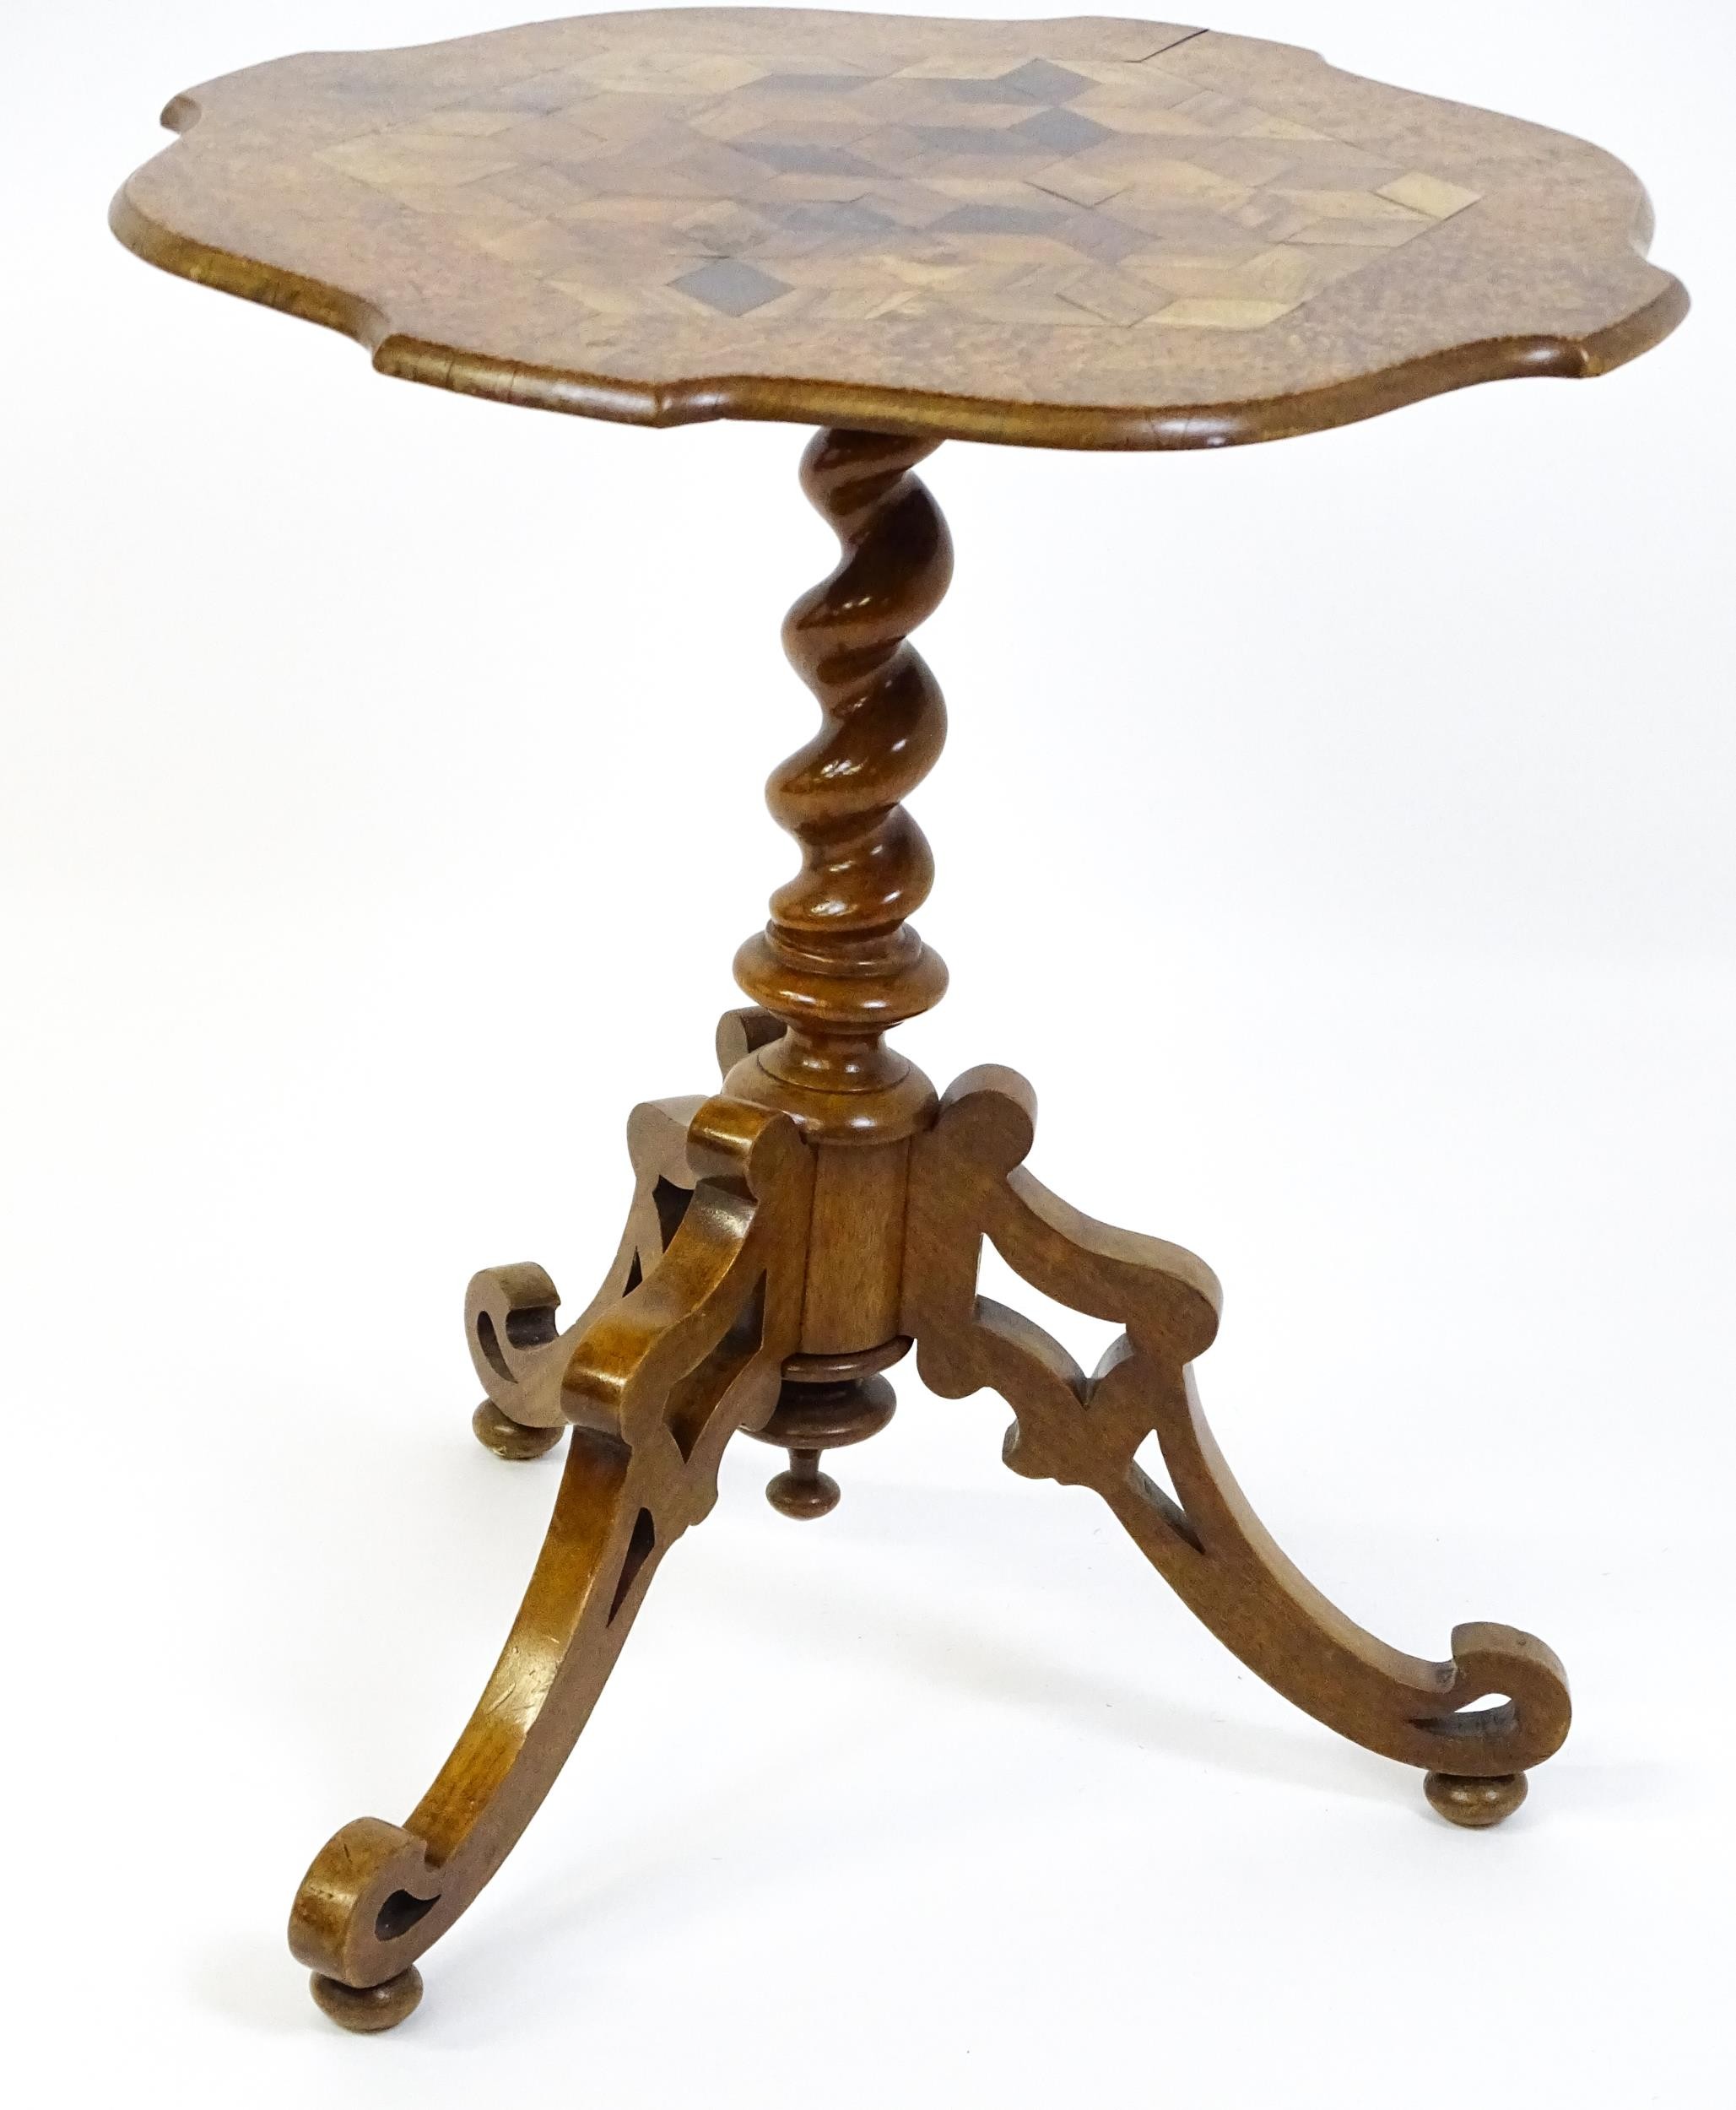 A 19thC tripod table with a burr amboyna veneered top surrounding a central parquetry style sample - Image 8 of 10